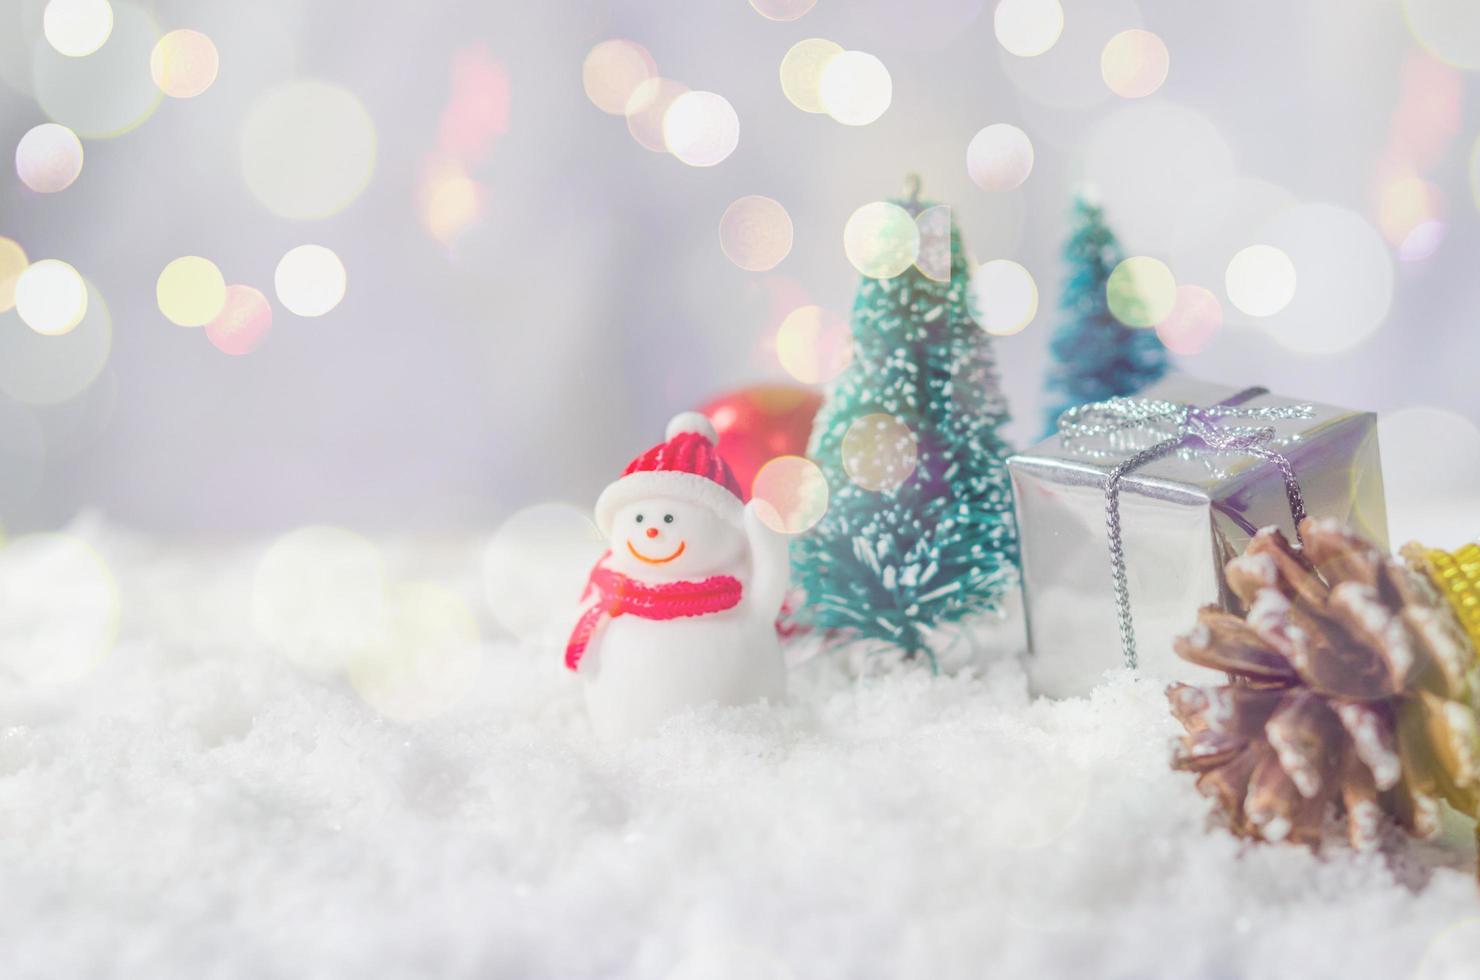 Miniature Christmas decorations in snow photo